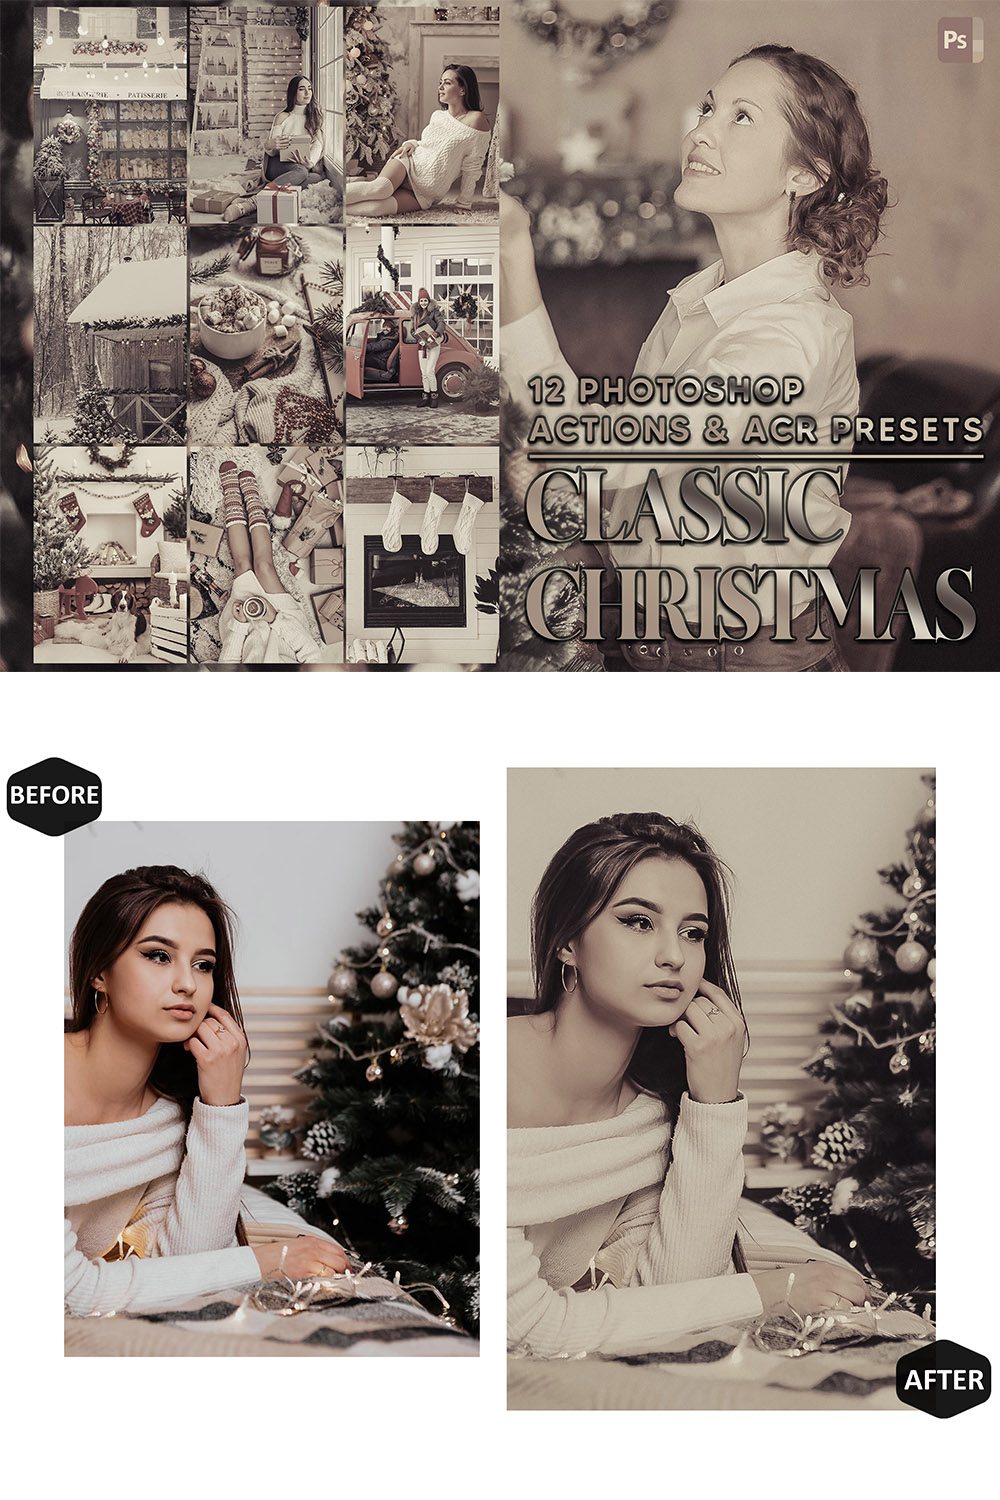 12 Photoshop Actions, Classic Christmas Ps Action, Vintage ACR Preset, Holiday Ps Filter, Atn Portrait And Lifestyle Theme For Instagram, Blogger pinterest preview image.